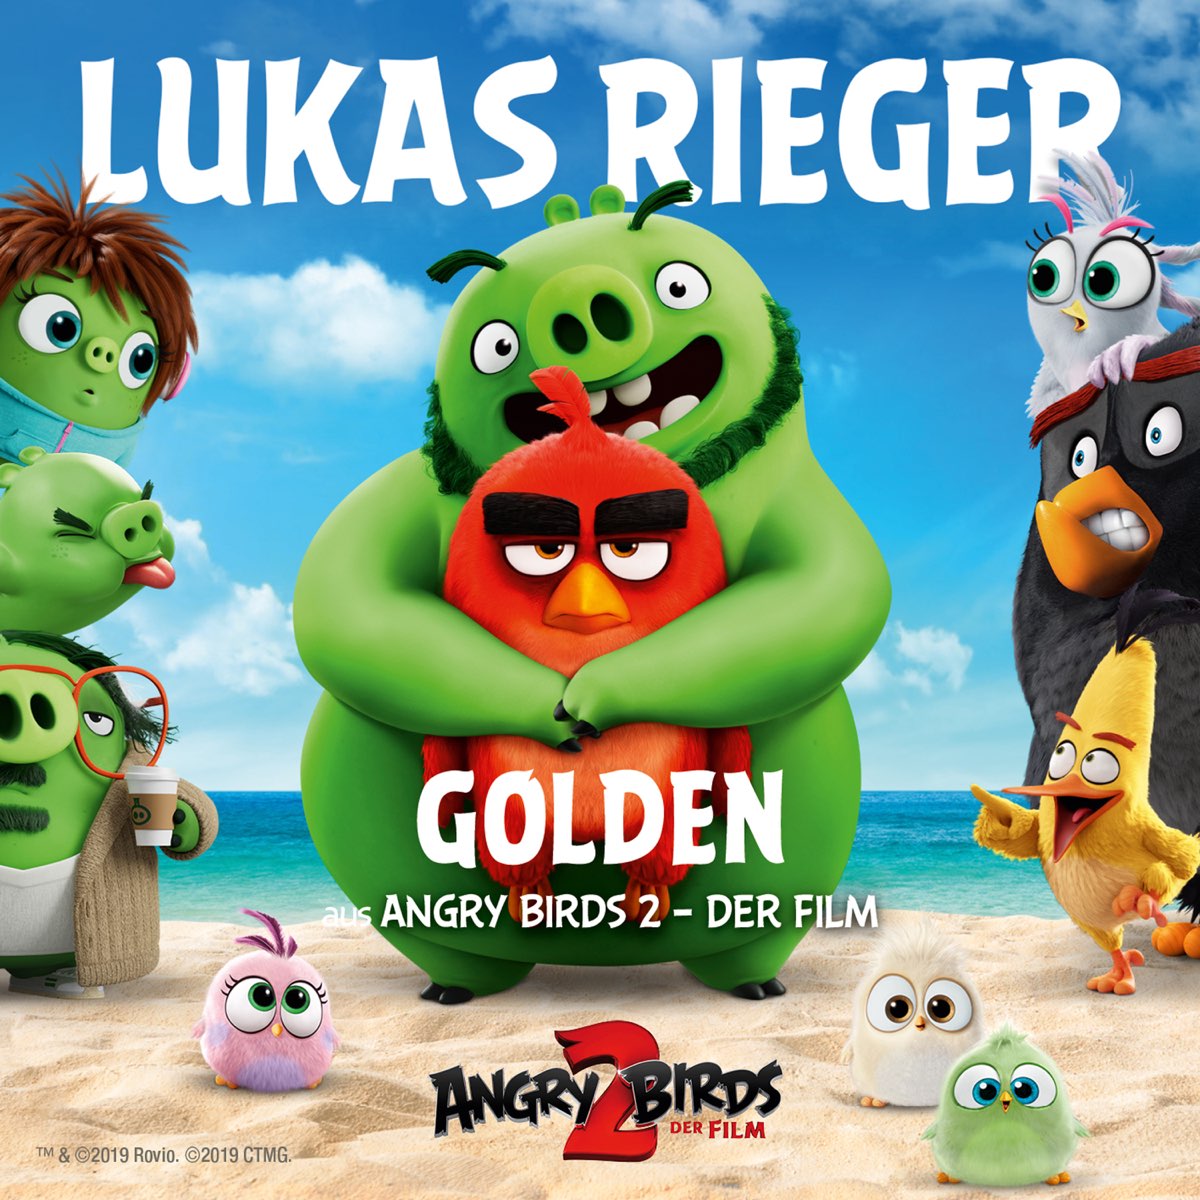 Golden (aus "Angry Birds 2 - Der Film") - Single by Lukas Rieger on Apple  Music